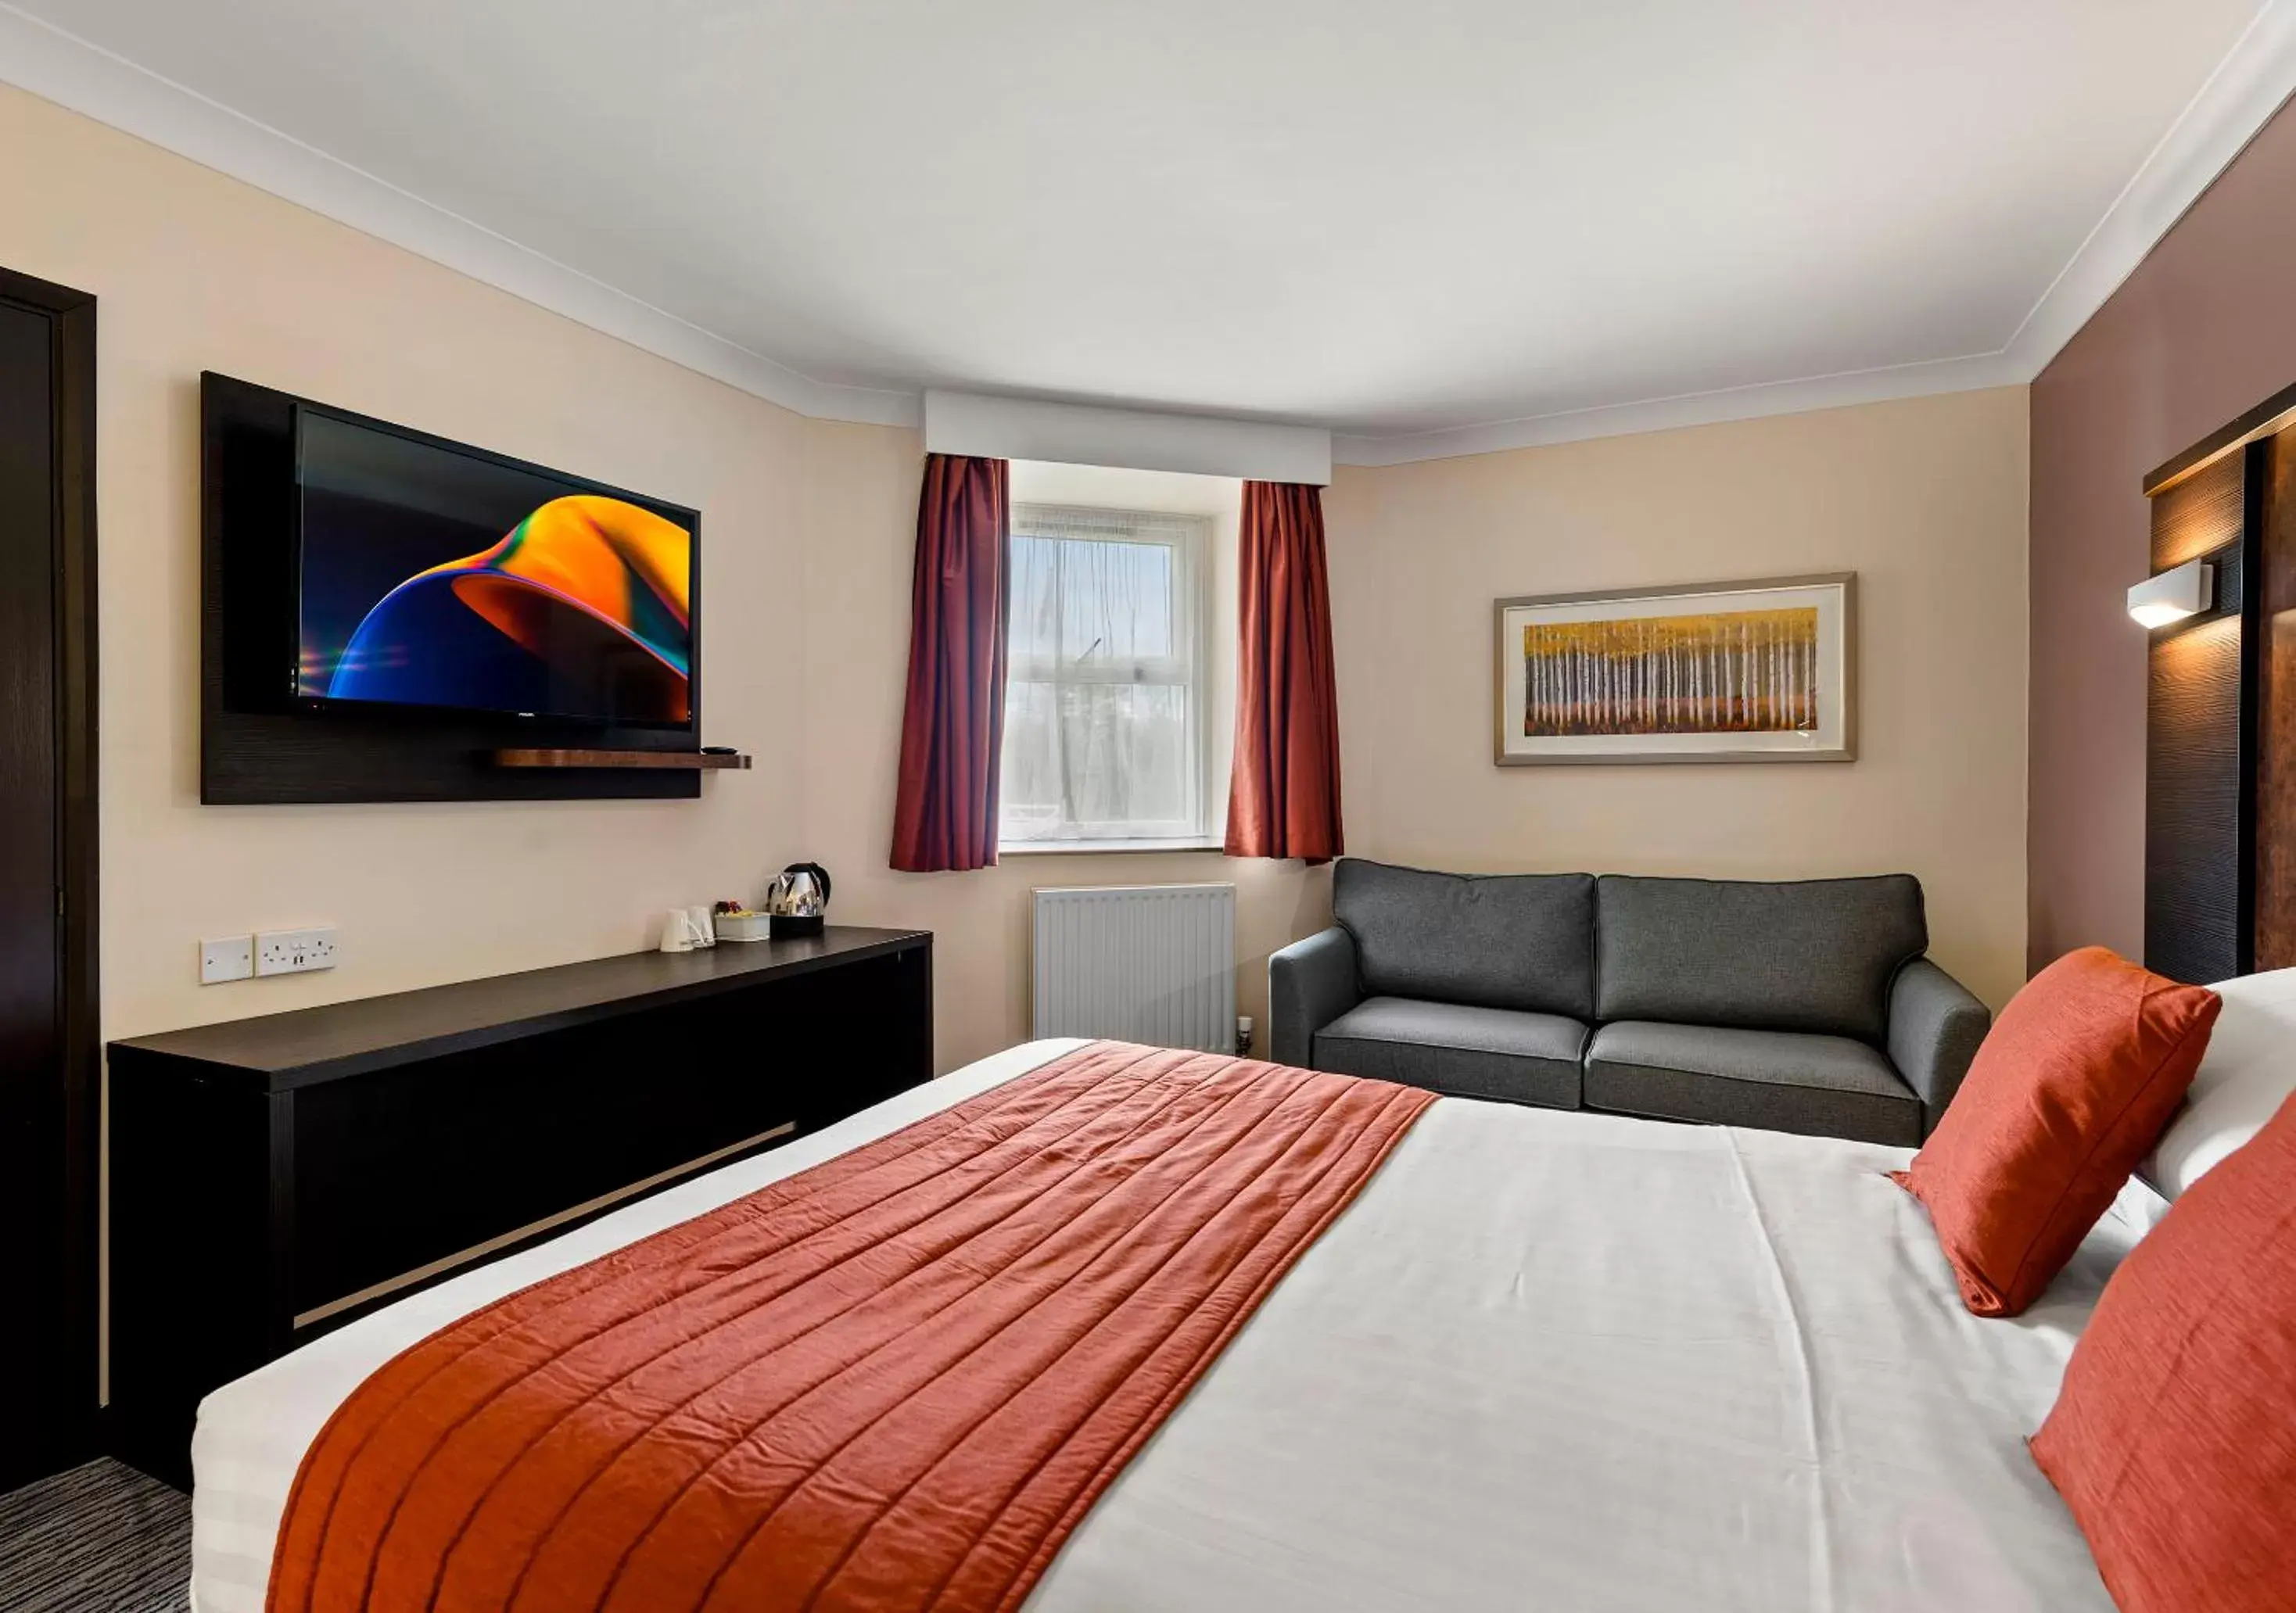 Bedroom, TV/Entertainment Center in Dragonfly Hotel Bury St Edmunds